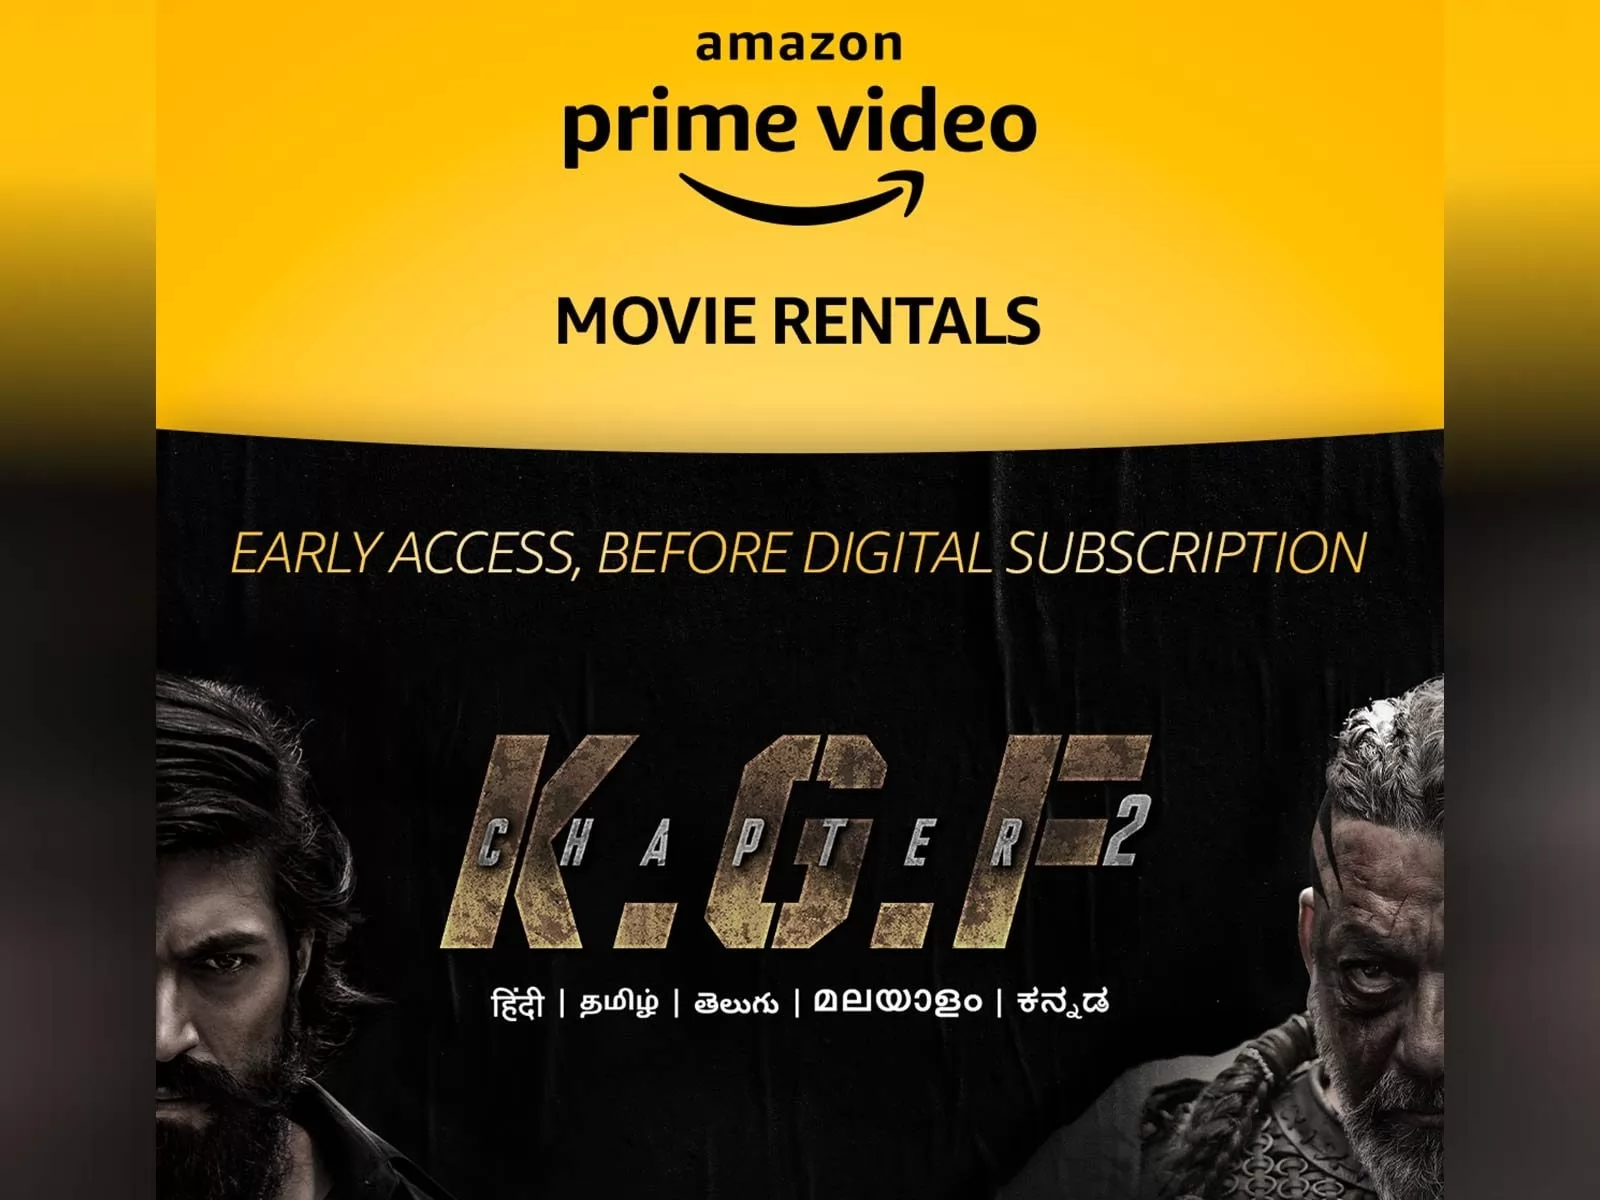 How to Rent movies on Amazon Prime video?